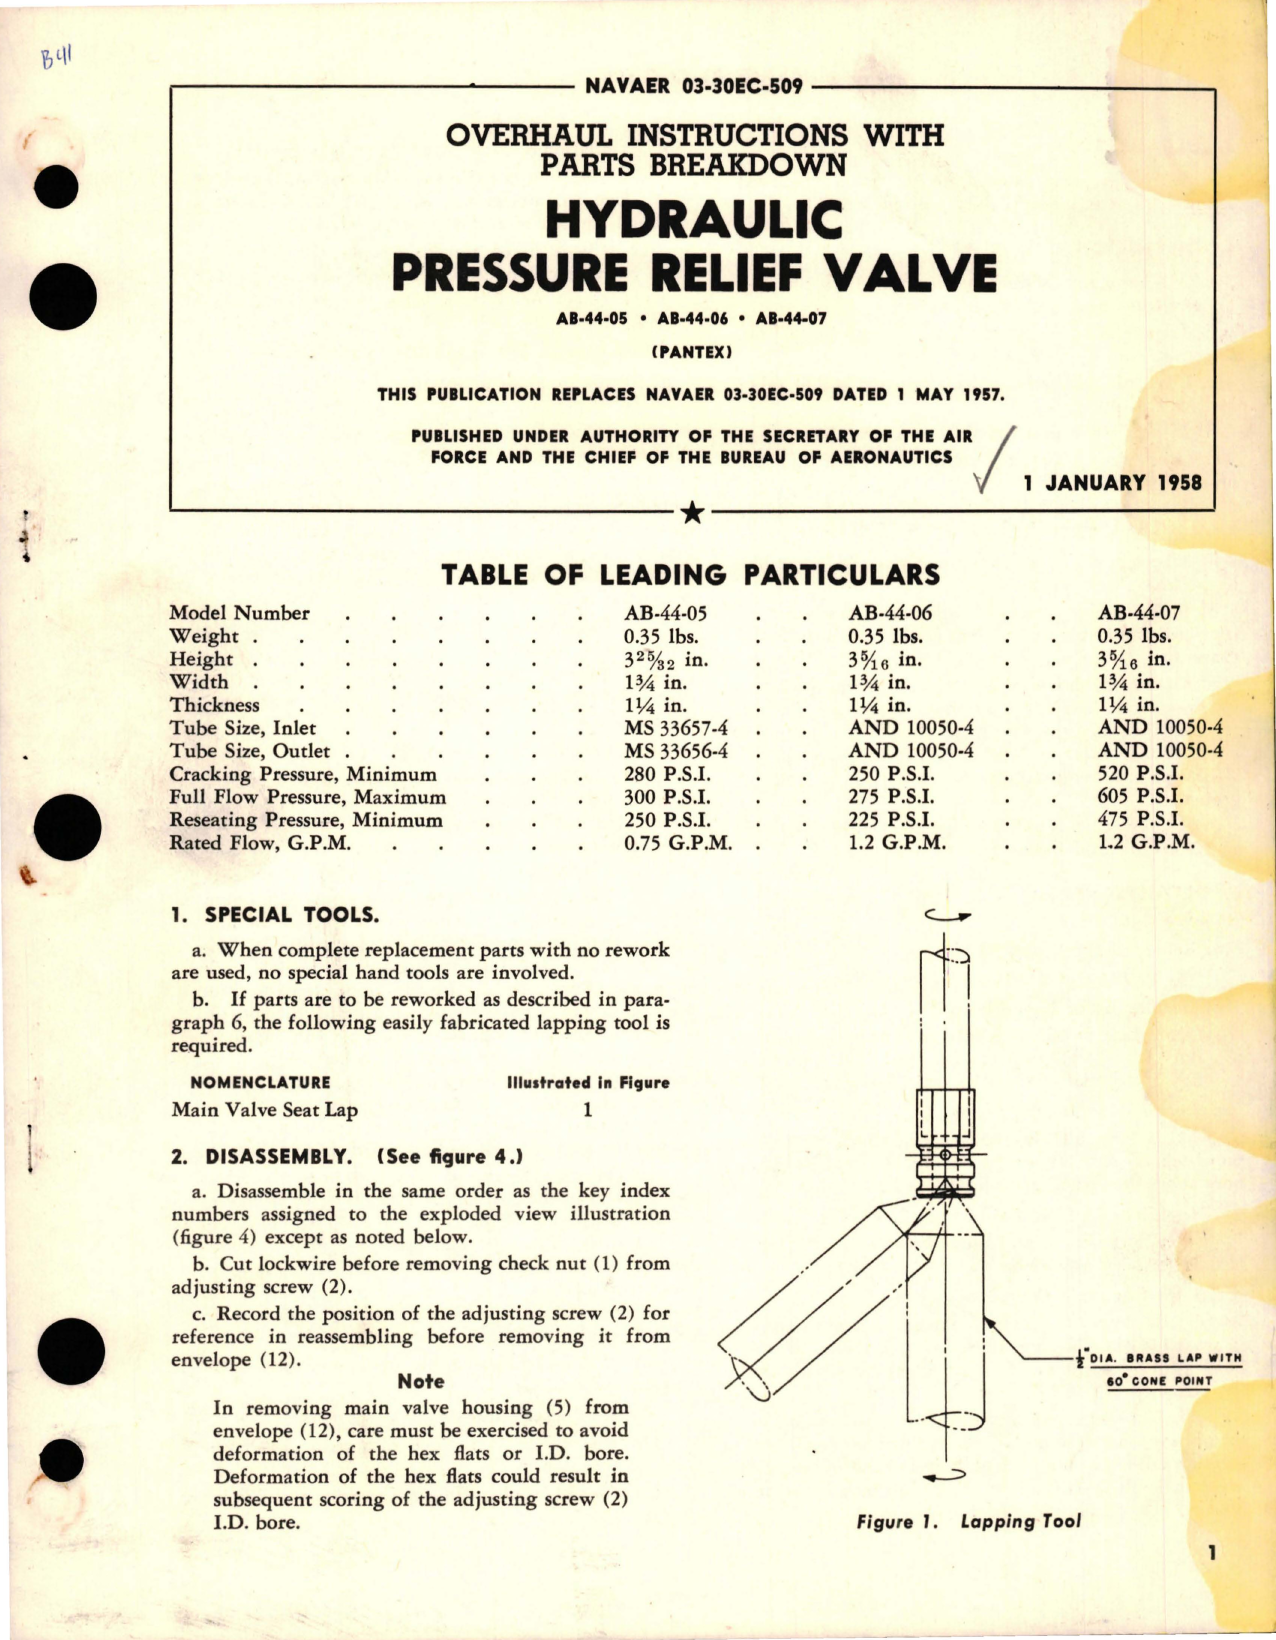 Sample page 1 from AirCorps Library document: Overhaul Instructions with Parts Breakdown for Hydraulic Pressure Relief Valve - AB-44-05, AB-44-06, and AB-44-07